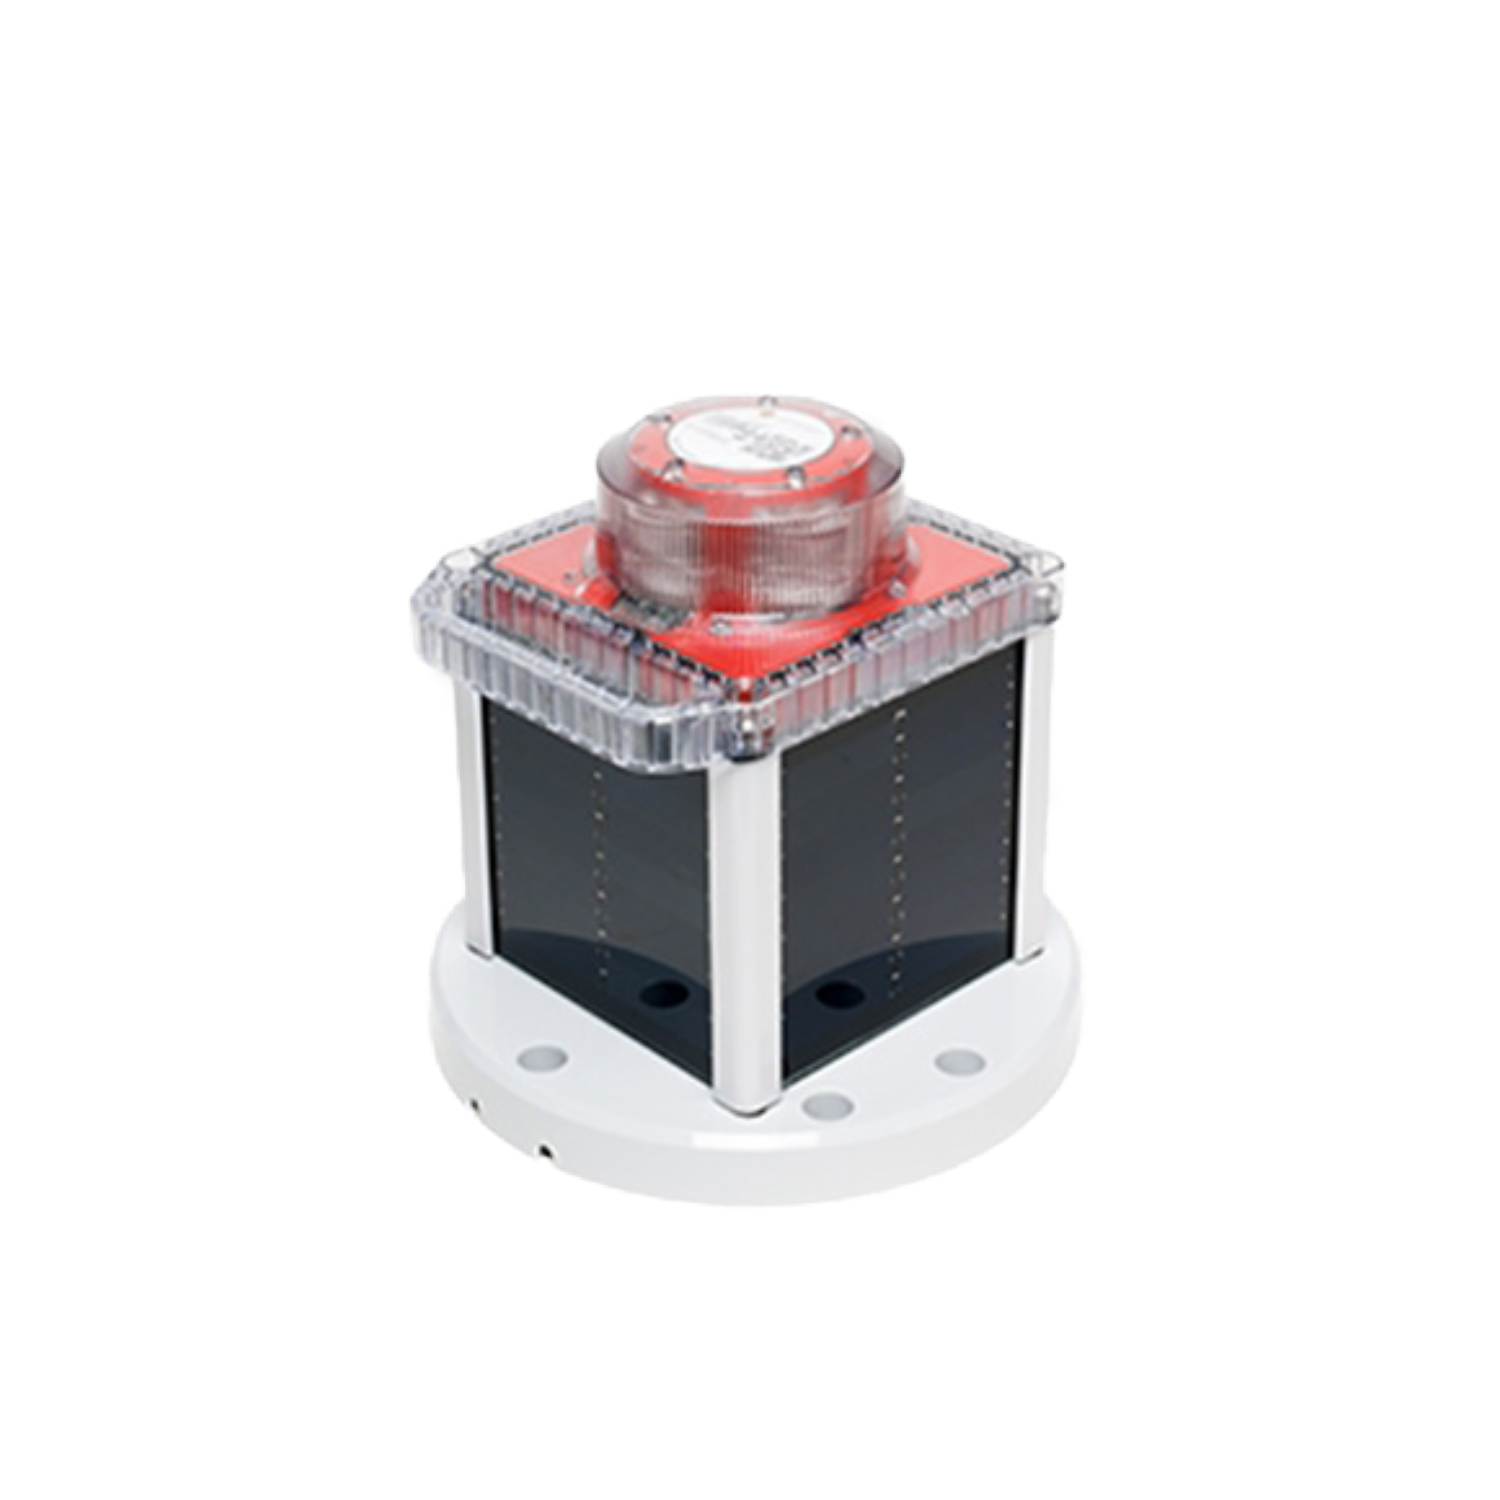 Self-contained LED Lantern for Buoys0